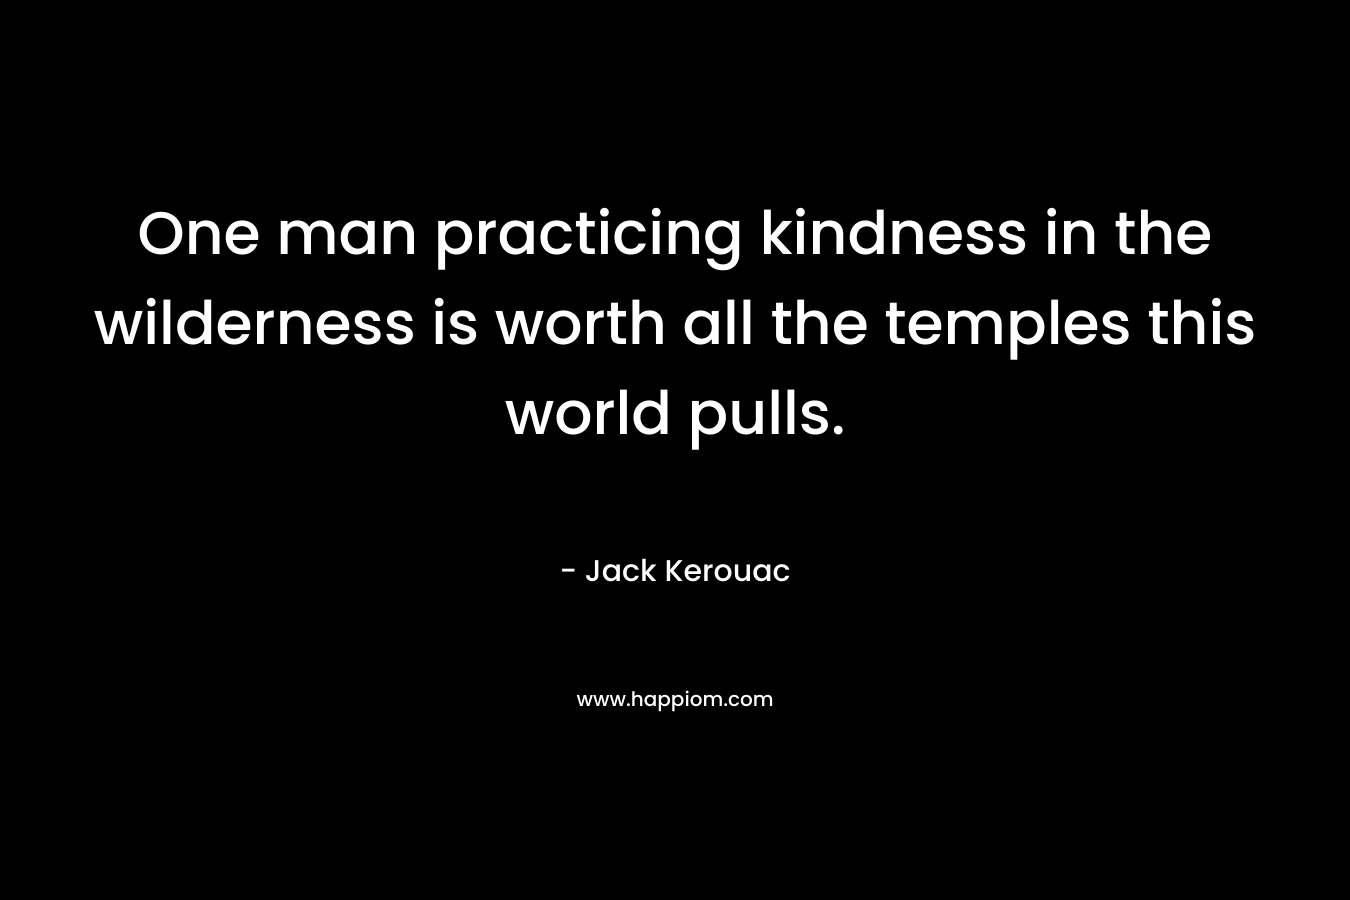 One man practicing kindness in the wilderness is worth all the temples this world pulls.